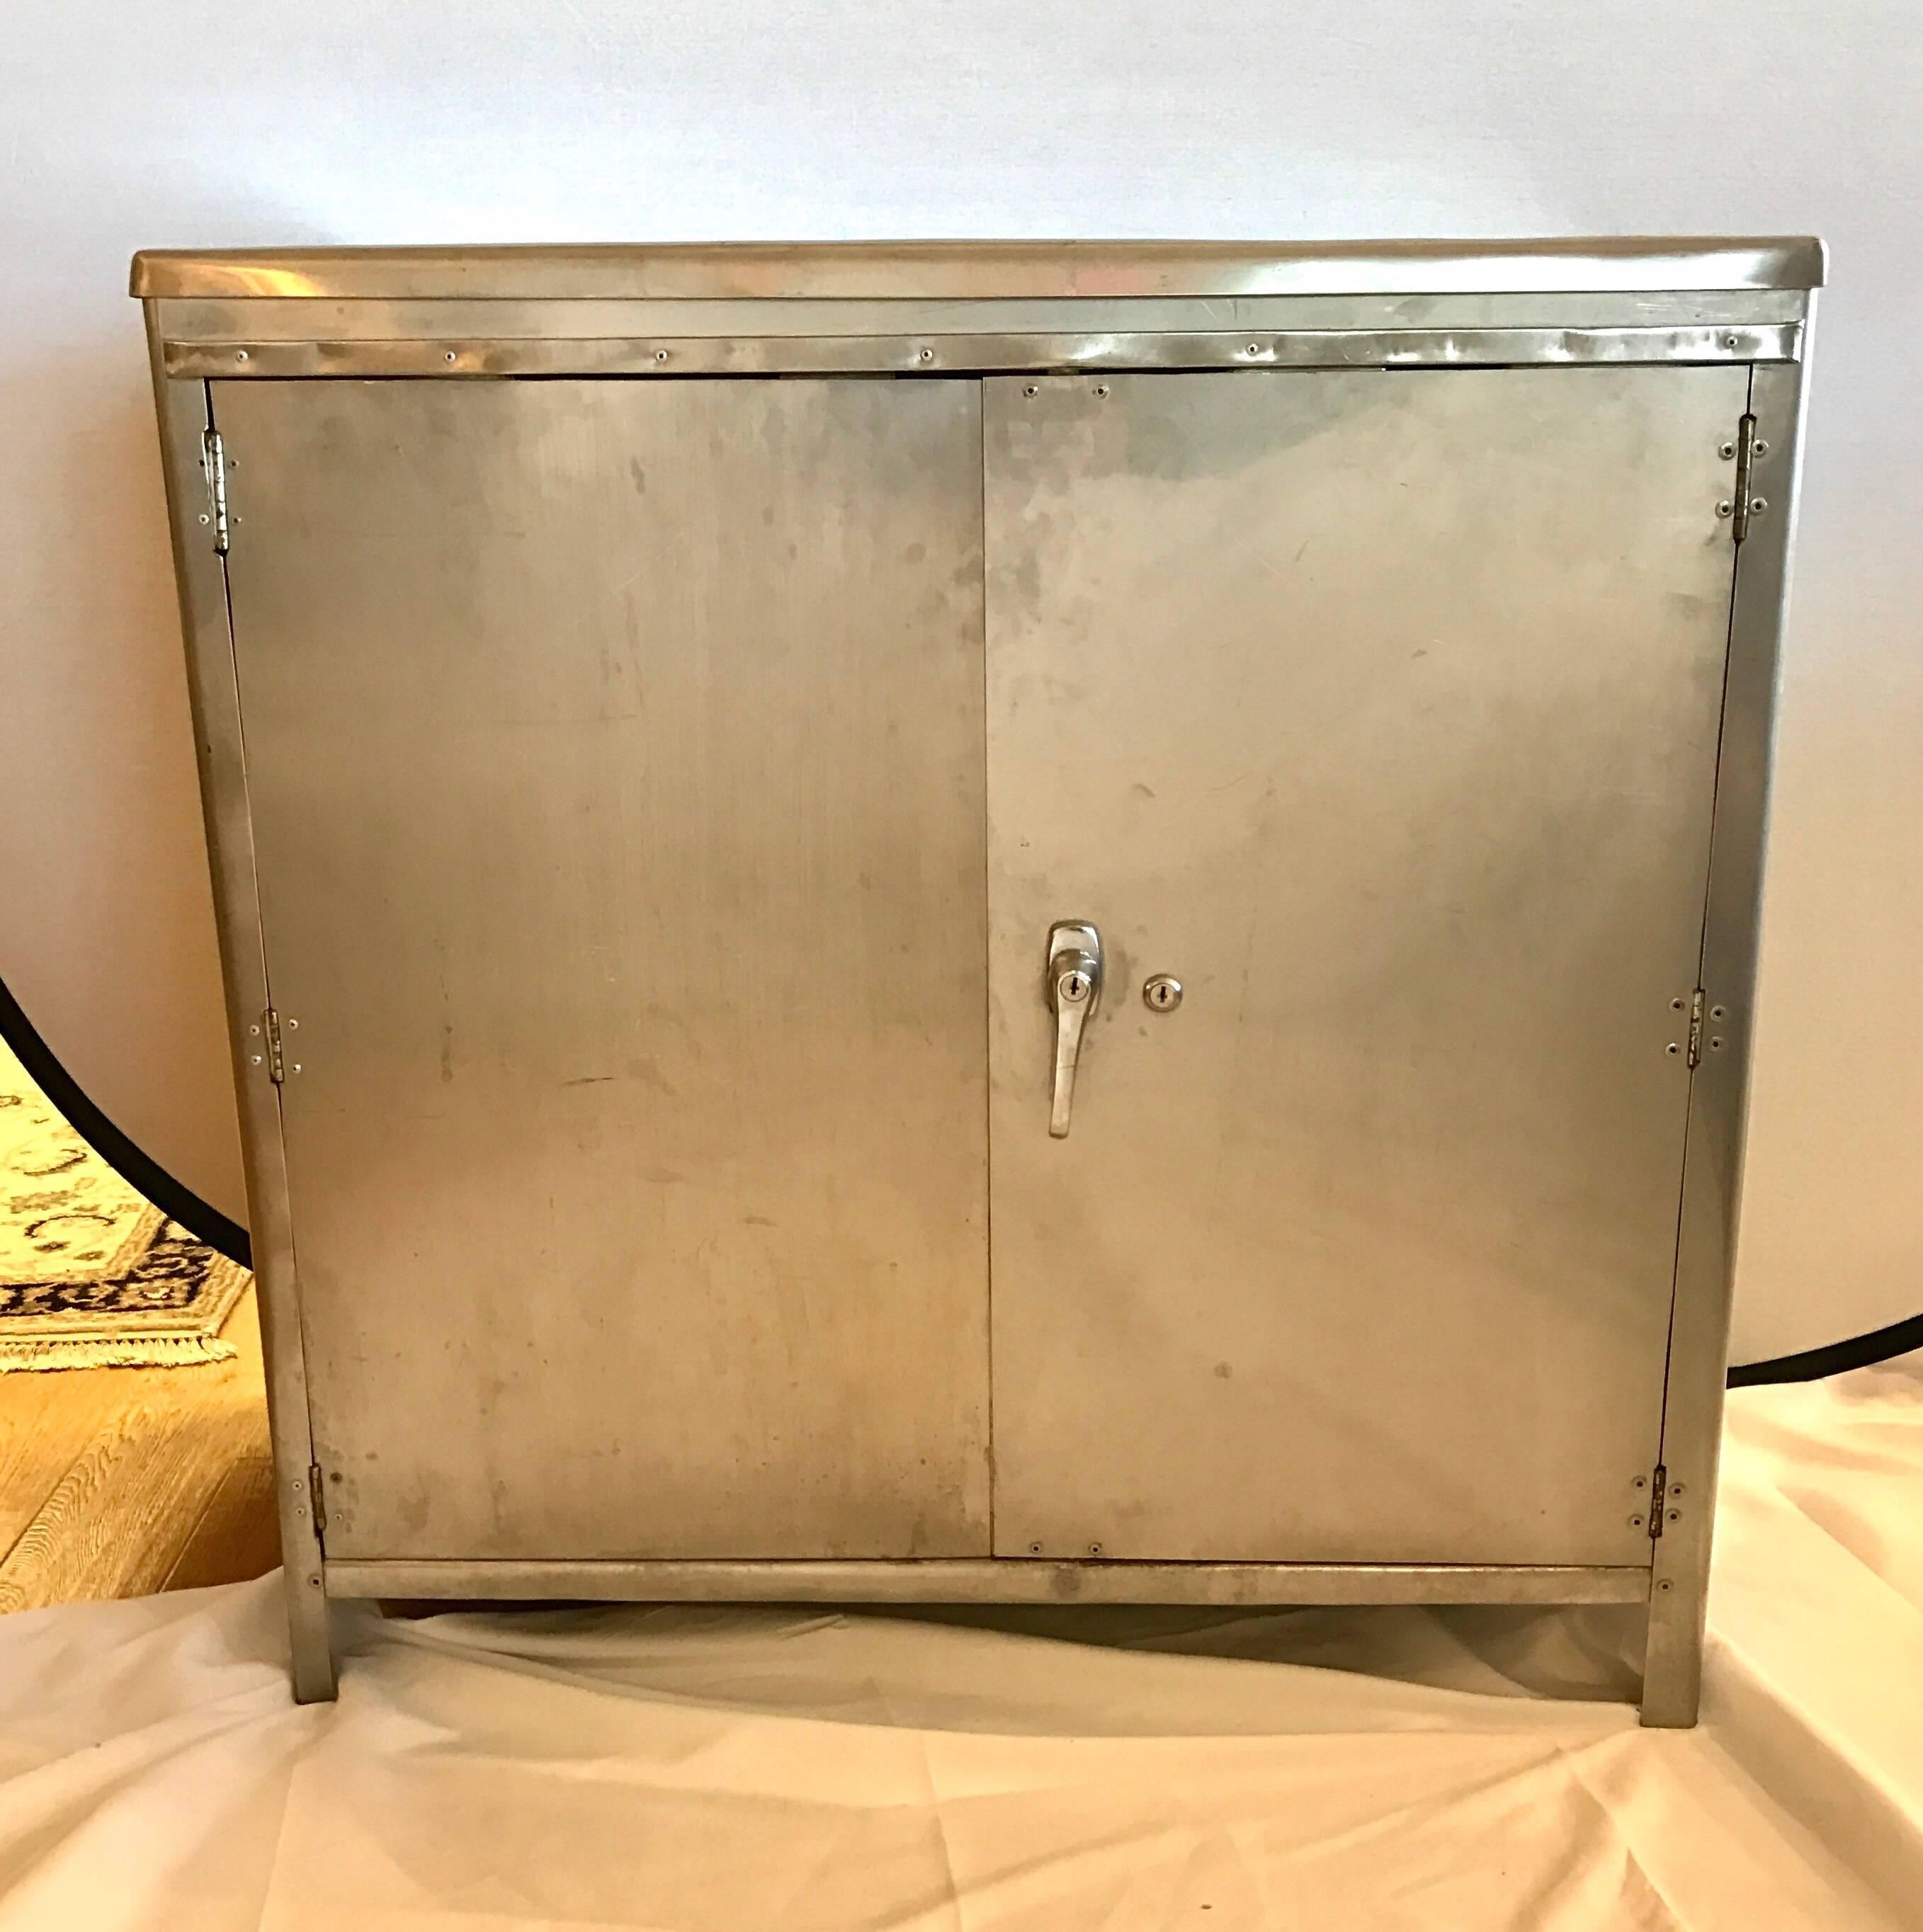 Multi purpose Industrial metal/steel bar cabinet or credenza with a polished finish. Has one shelf. Just the right size for your apartment or large home.